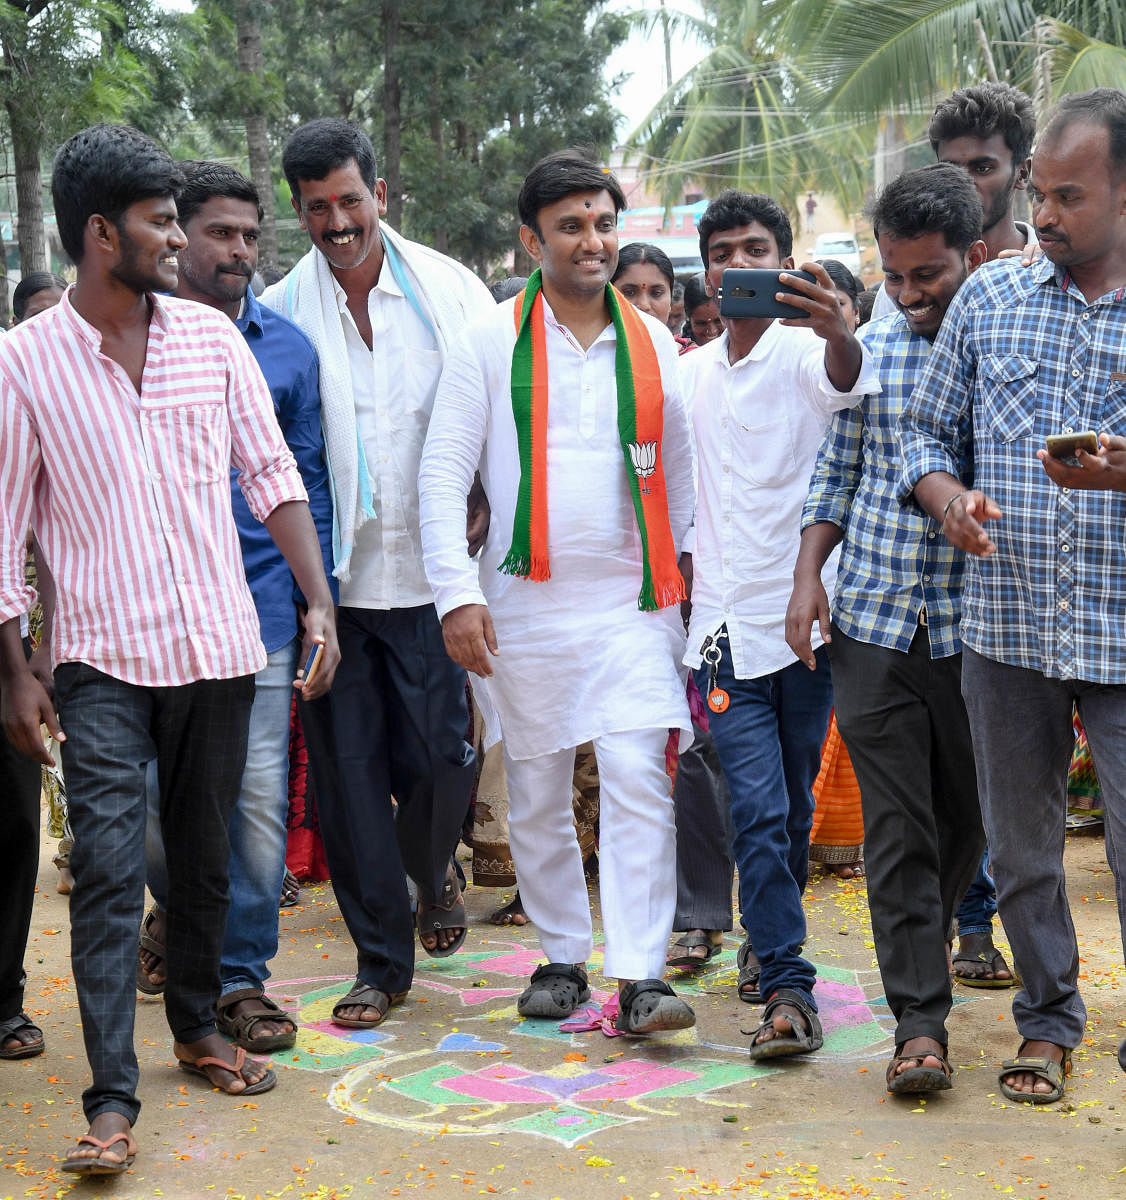 In his speeches, the candidate reaffirms people that he is their “son,” juxtaposing it with the backgrounds of JD(S) candidate Radhakrishna, from Shidlaghatta, and Congress candidate Anjanappa from Devanahalli. DH Photo